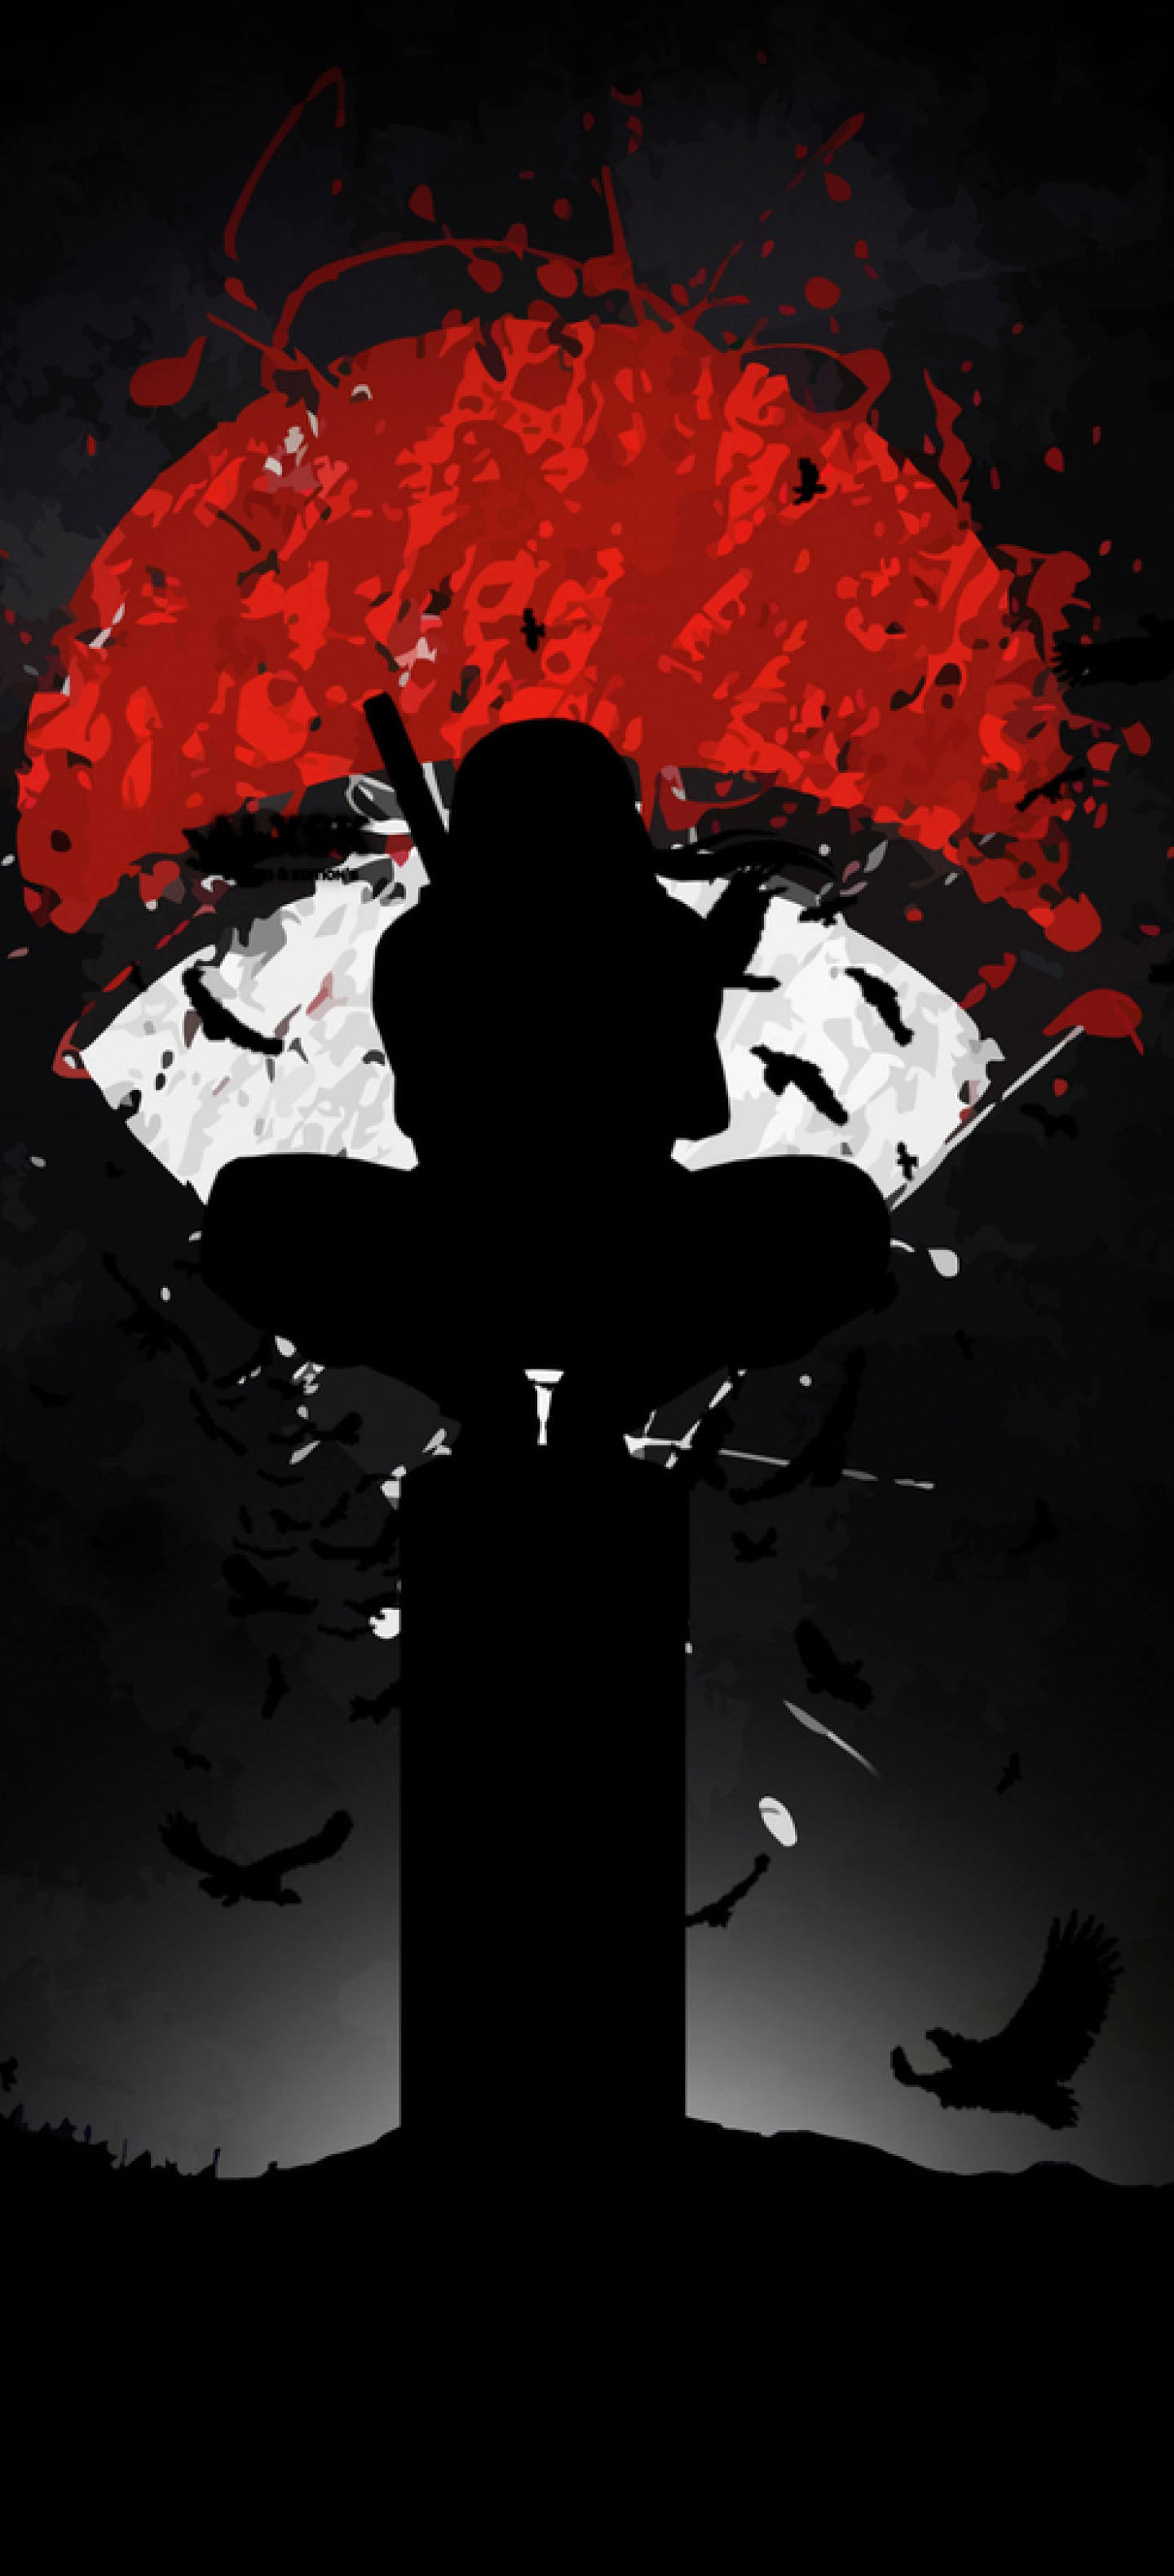 1440x3160 Itachi Uchiha Naruto Hd Dark 1440x3160 Resolution Wallpaper Hd Anime 4k Wallpapers Images Photos And Background Wallpapers Den